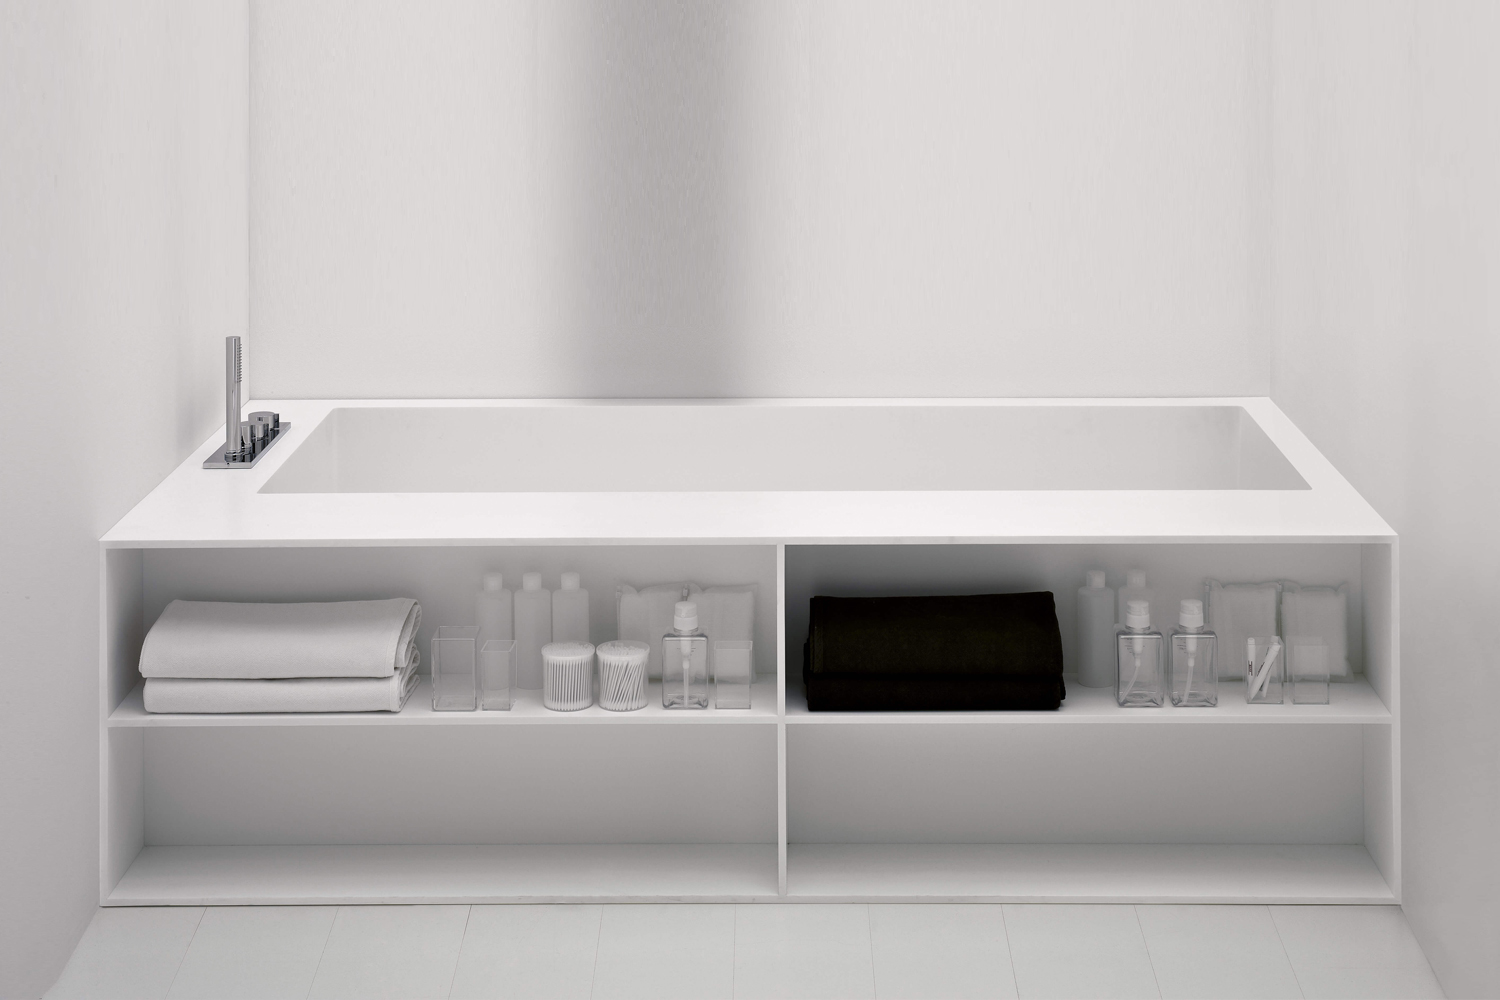 the biblio by antonio lupi is a corian tub with built in shelf options. contact 12